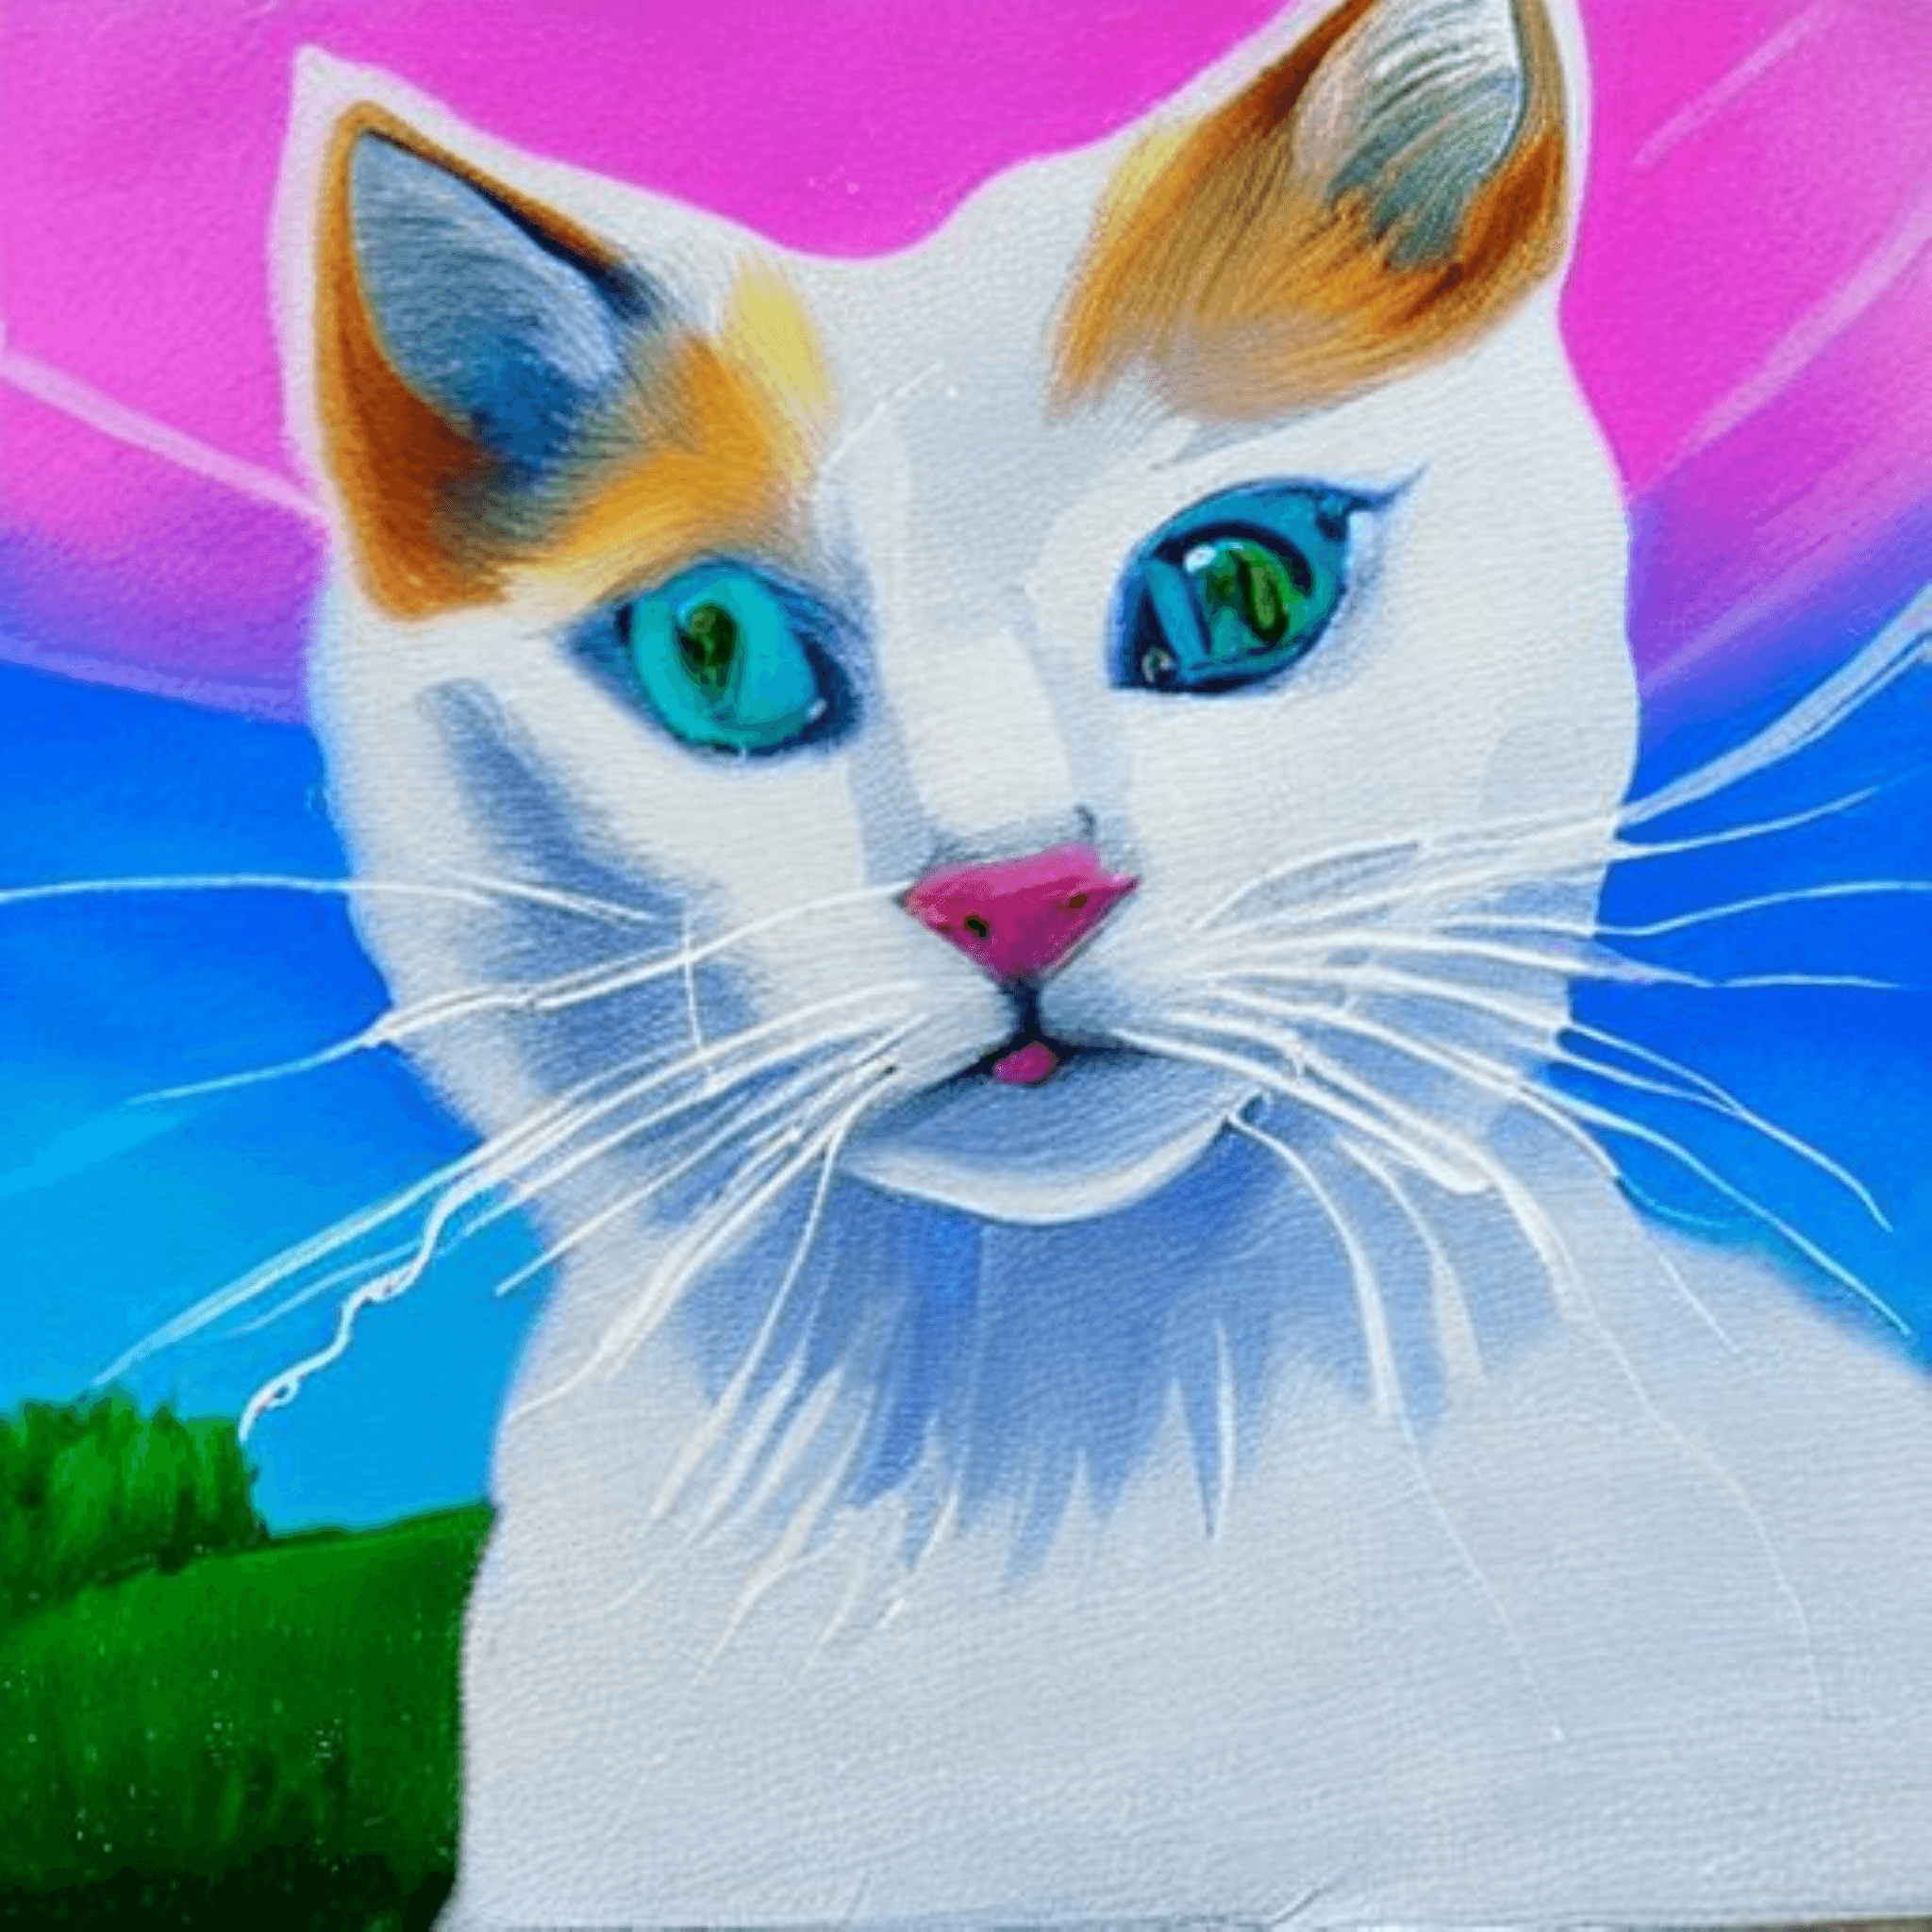 Art Acrylic Painting of a White Cat with Blue Eyes